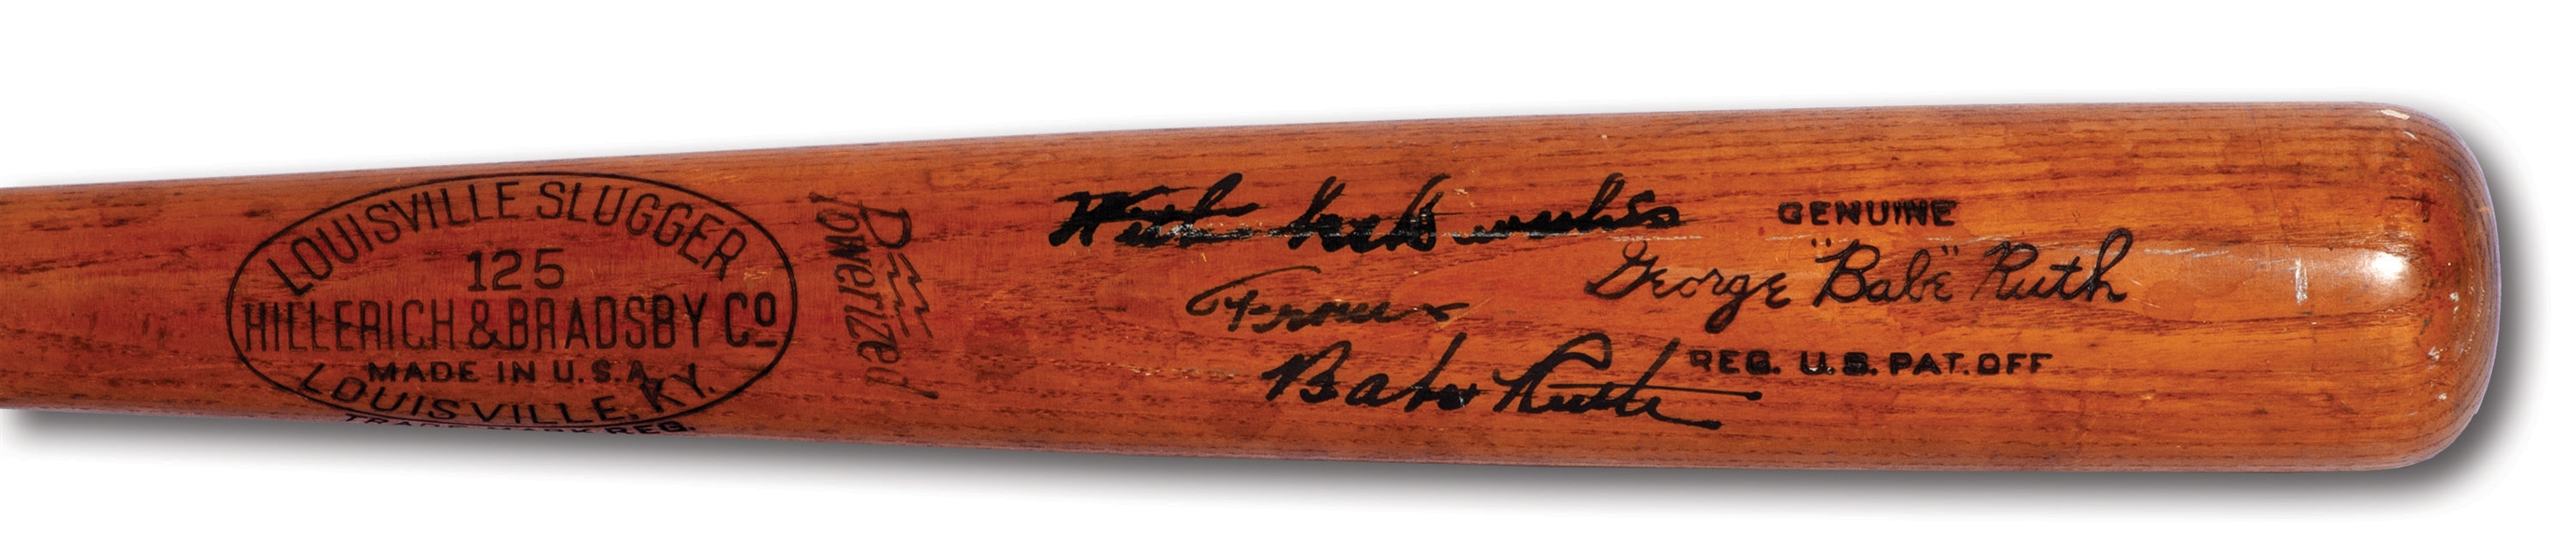 1944-47 BABE RUTH SIGNED HILLERICH & BRADSBY BAT INSCRIBED "WITH BEST WISHES" (PSA/DNA MINT 9) - FINEST KNOWN EXAMPLE!